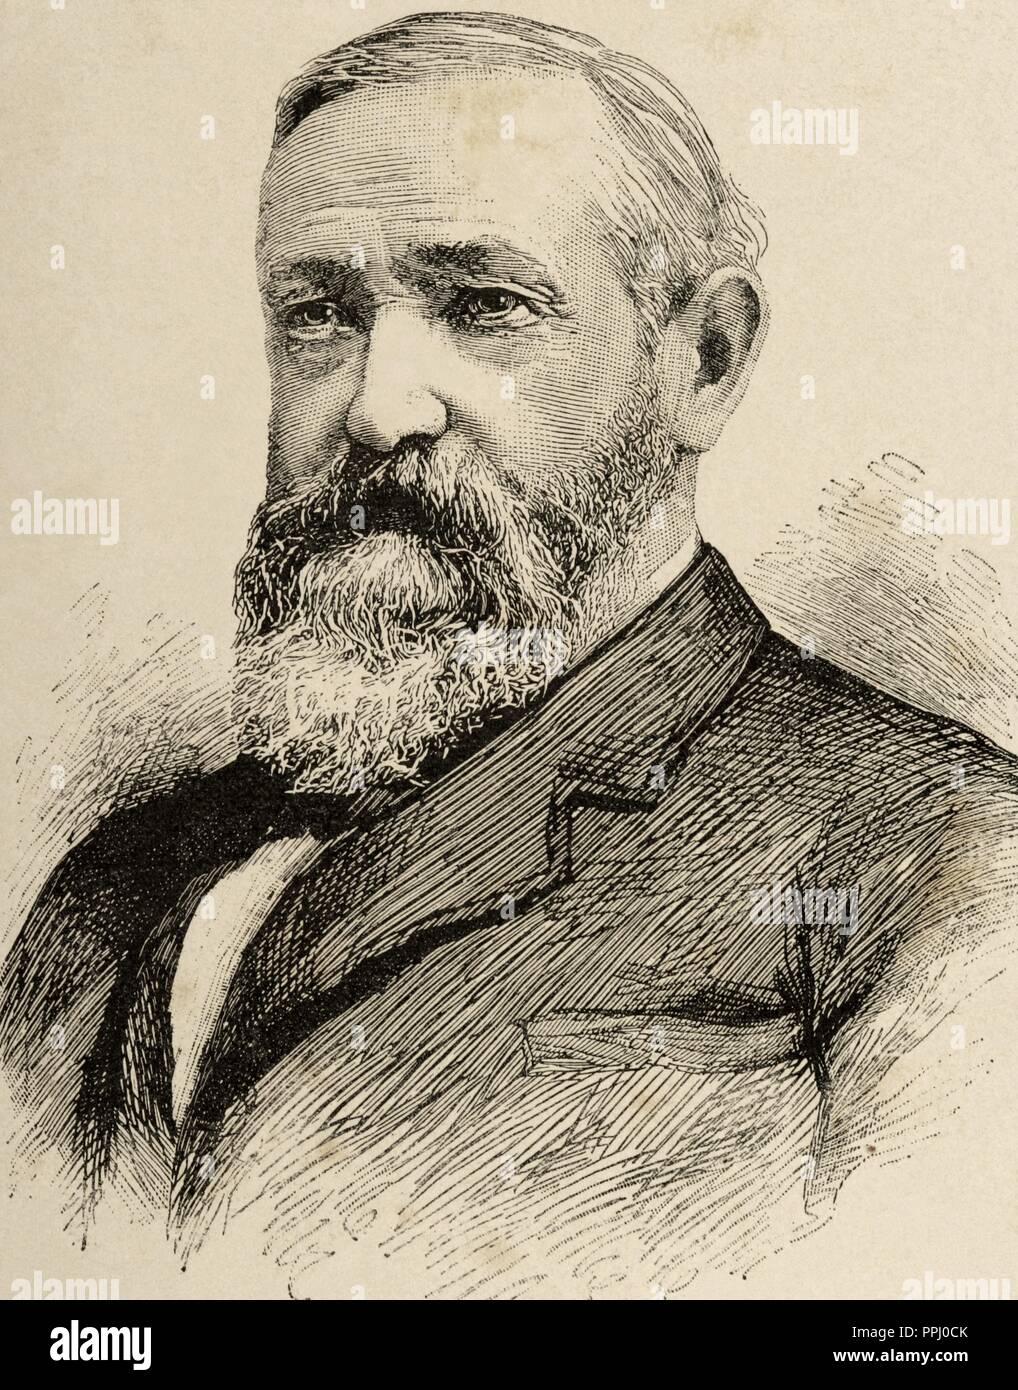 Benjamin Harrison (1833 Ð 1901). Was the 23rd President of the United States (1889Ð1893). During the American Civil War, he served the Union. Political party: Republican. Engraving. "The artistic illustration". 1885. Stock Photo